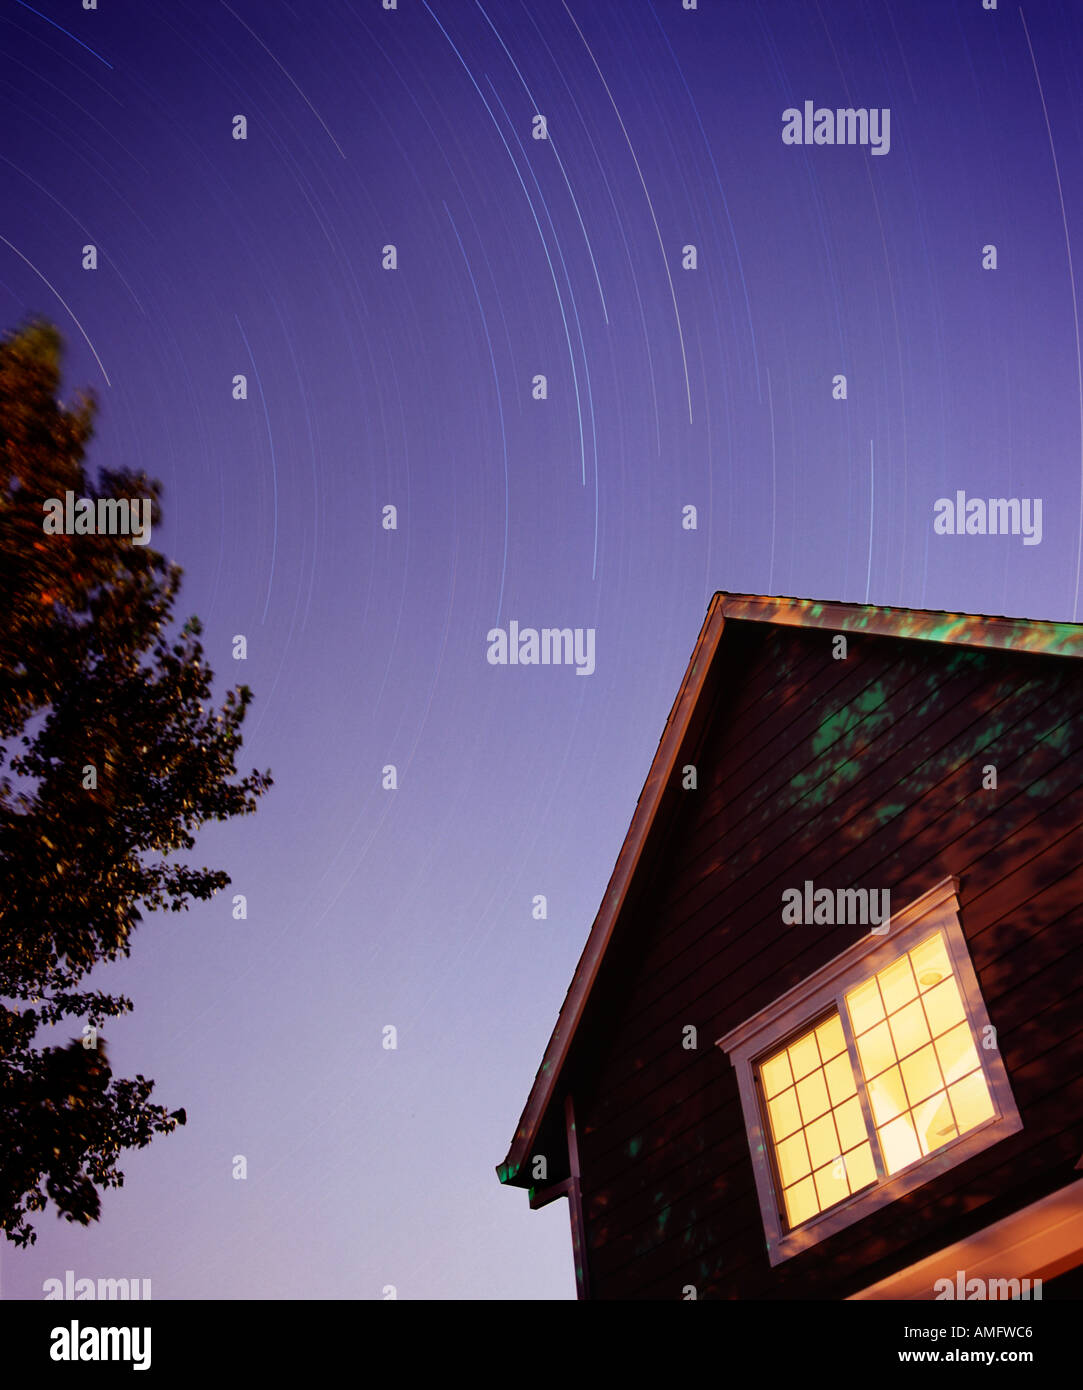 Five hour exposure of house with startrails in sky Stock Photo